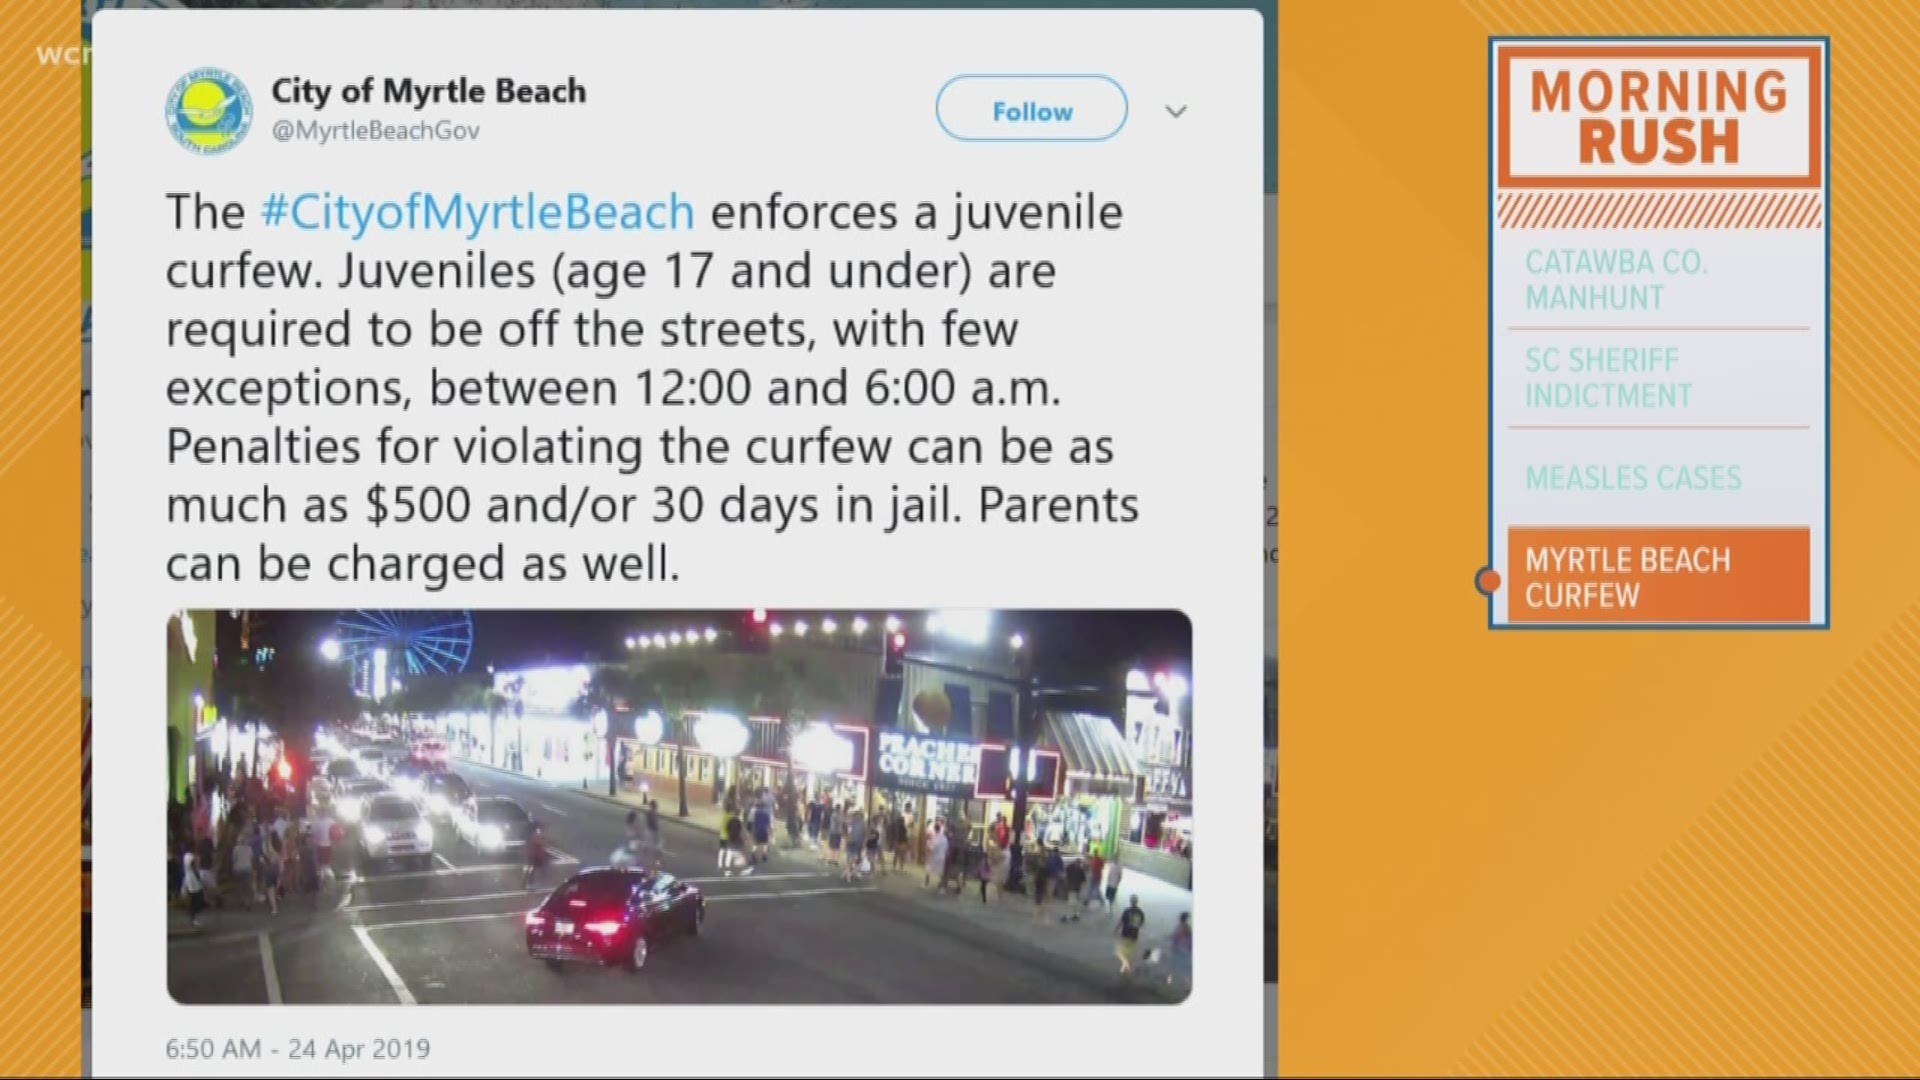 The City of Myrtle Beach tweeted a reminder about its juvenile curfew ahead of the busy summer vacation season.